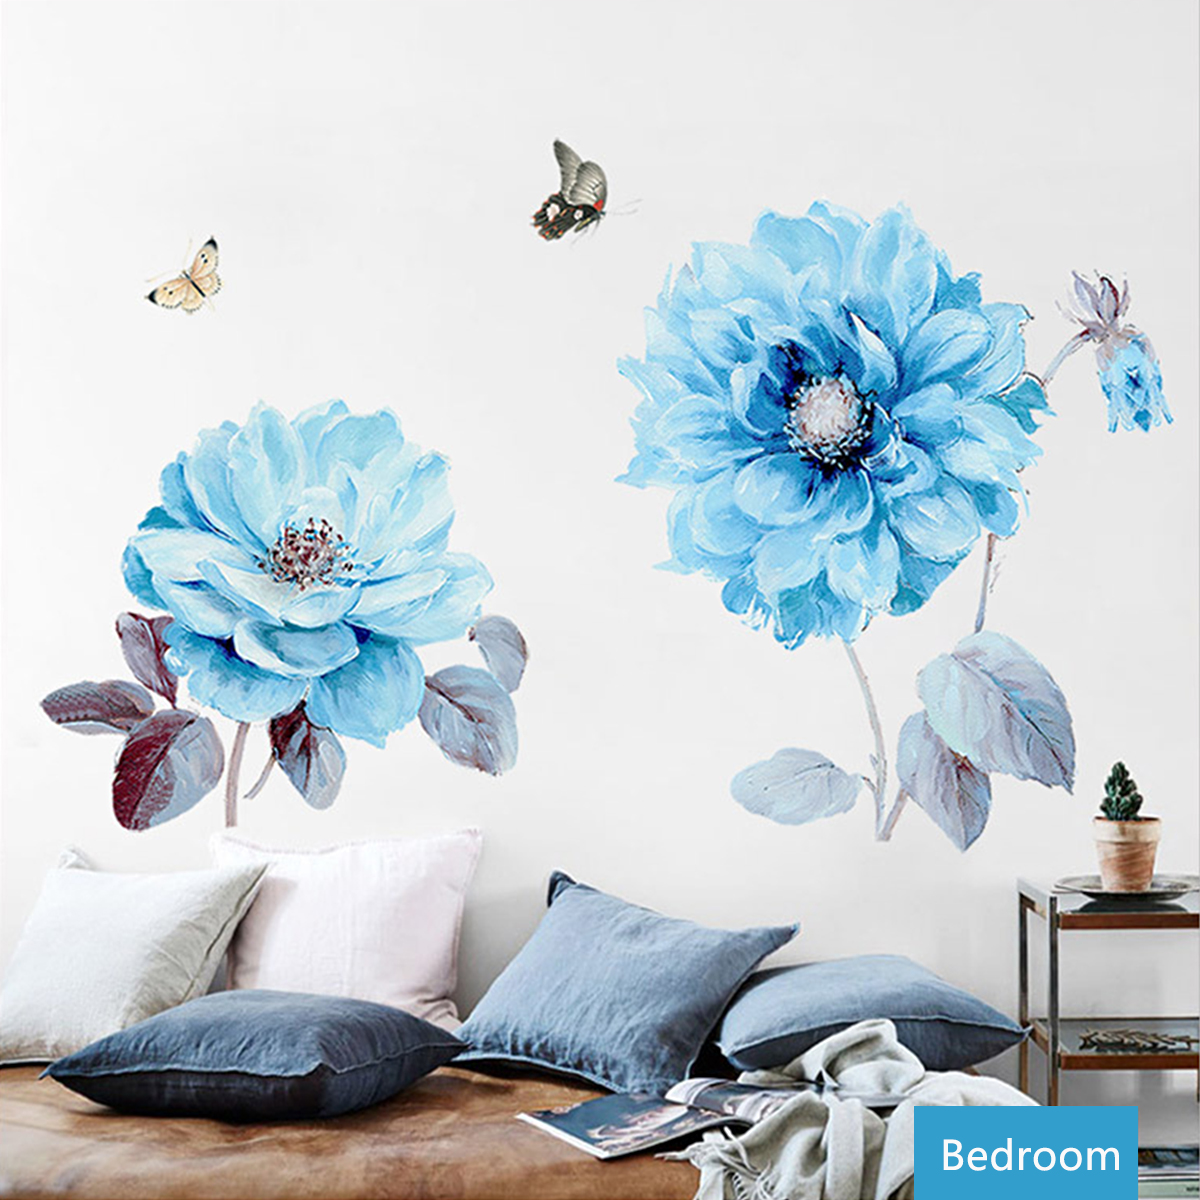 Blue-Flowers-Wall-Sticker-Room-Sticker-Living-Room-Background-Bedroom-Decorations-1524262-7